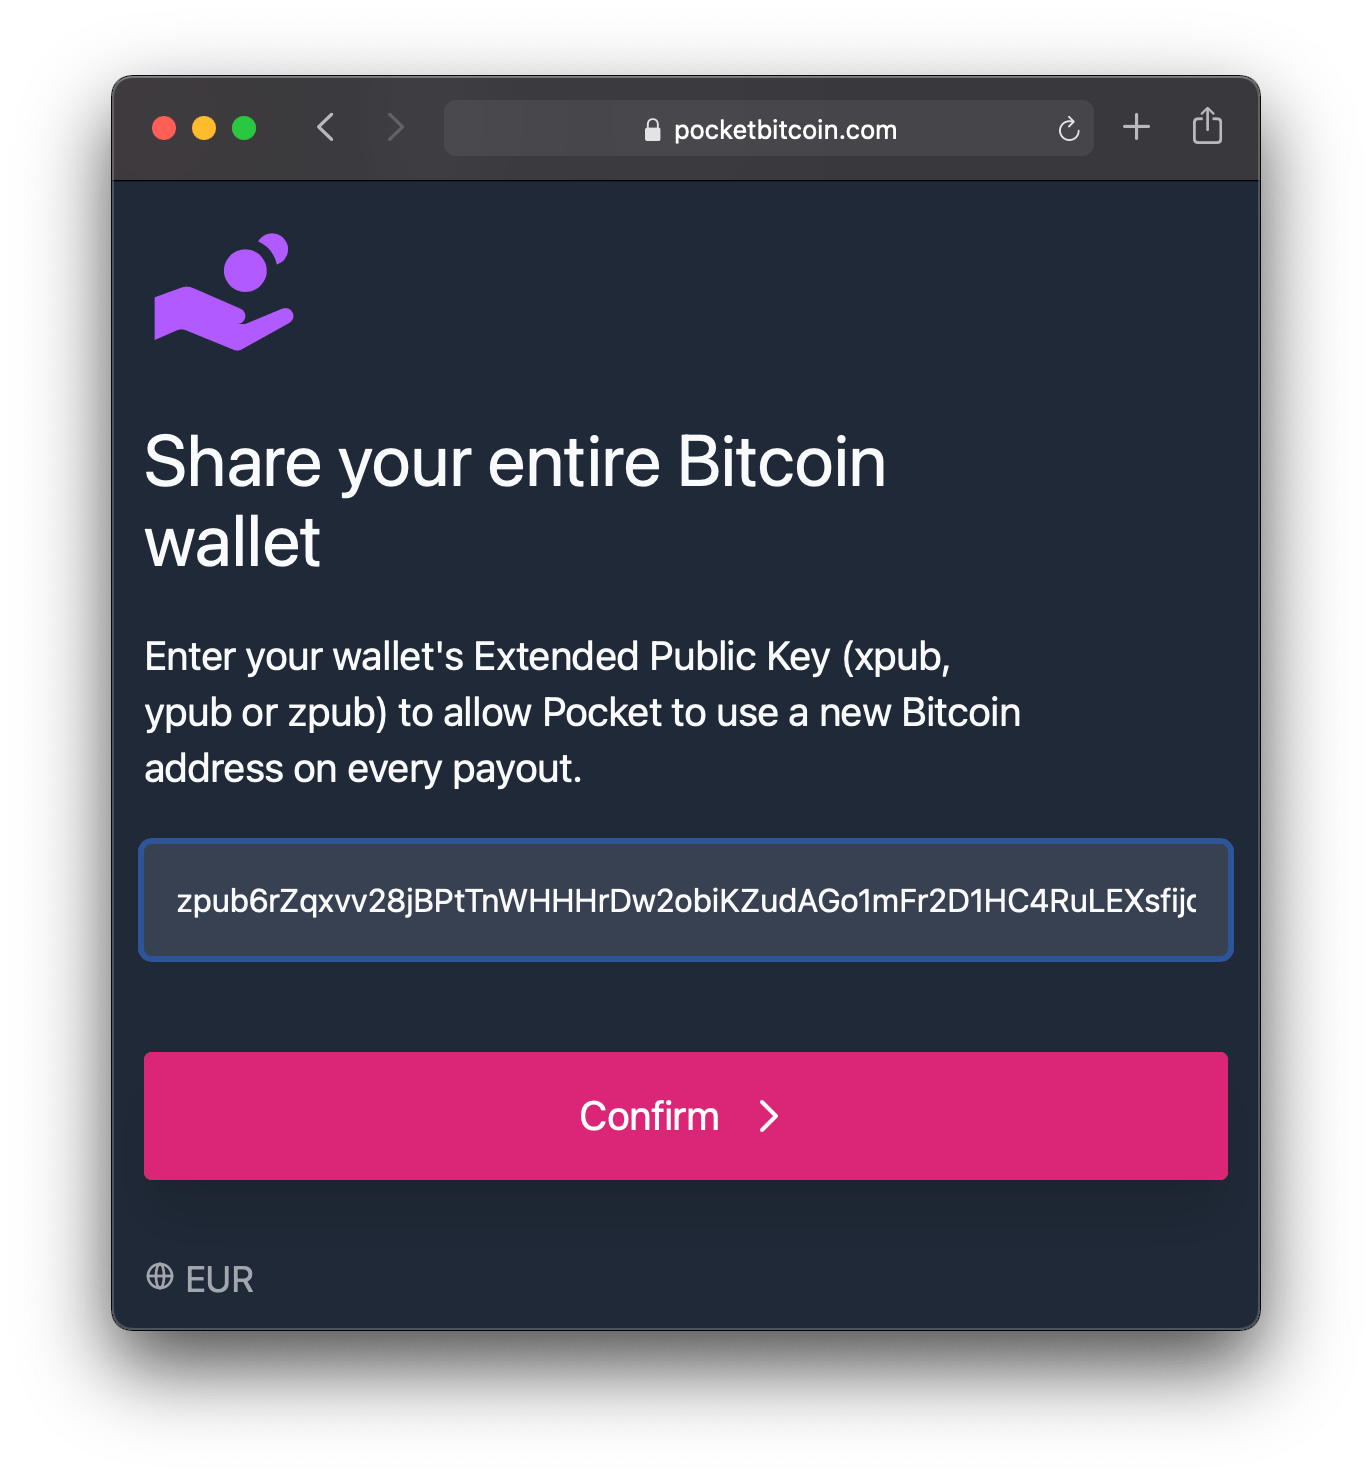 Screenshot of the form to share entire wallet on Pocket